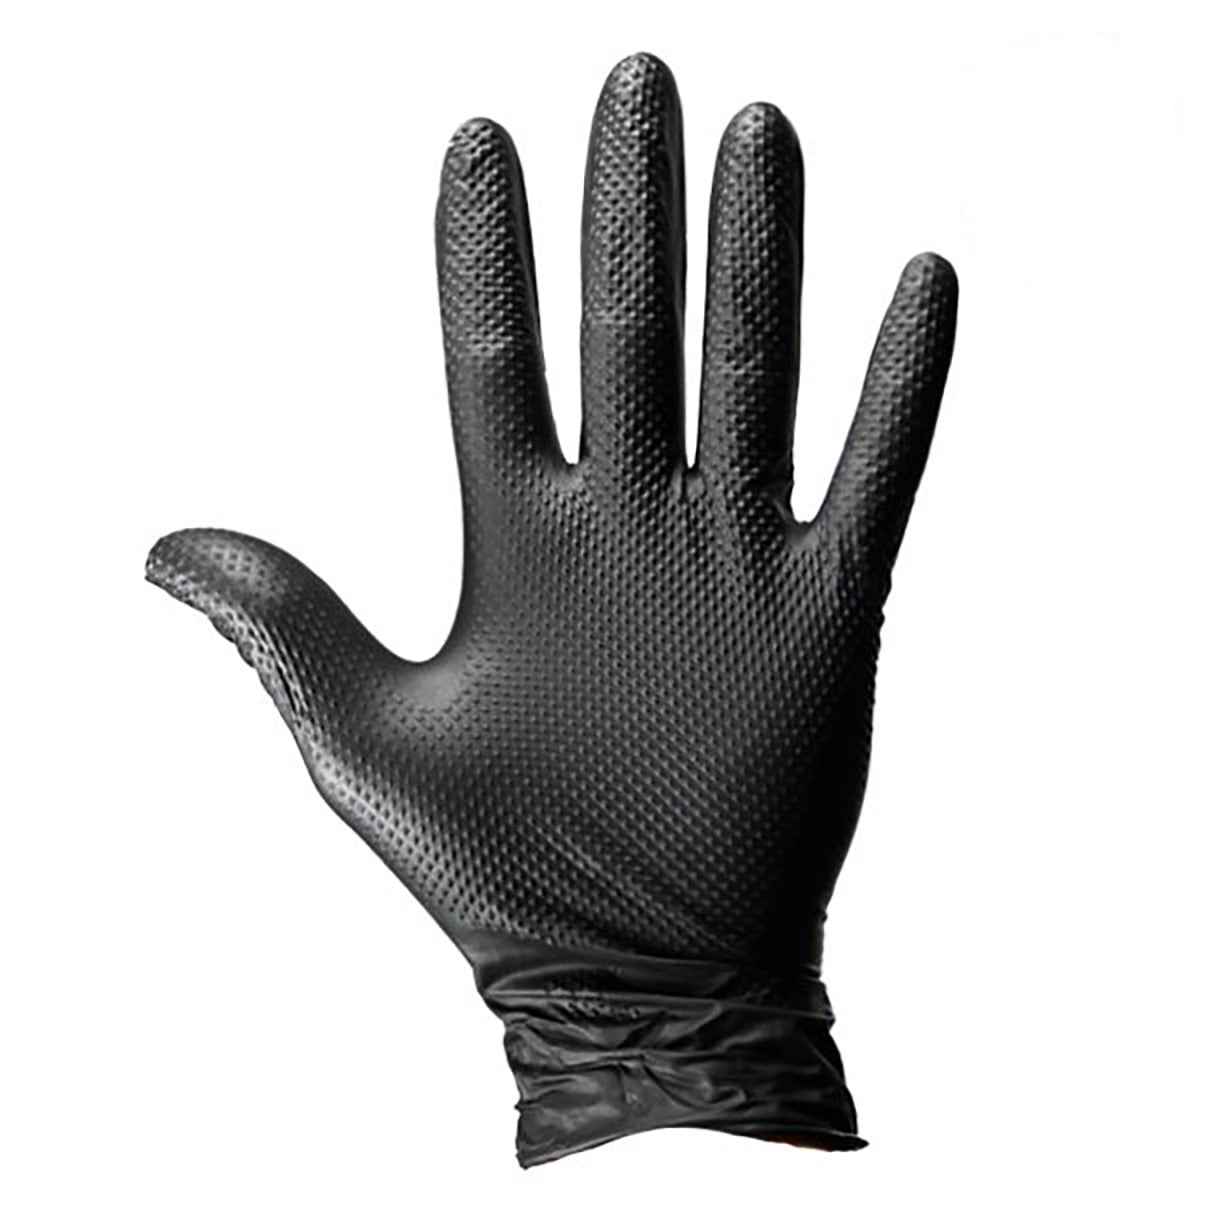 Black Diamond Grip Gloves For Industrial Use